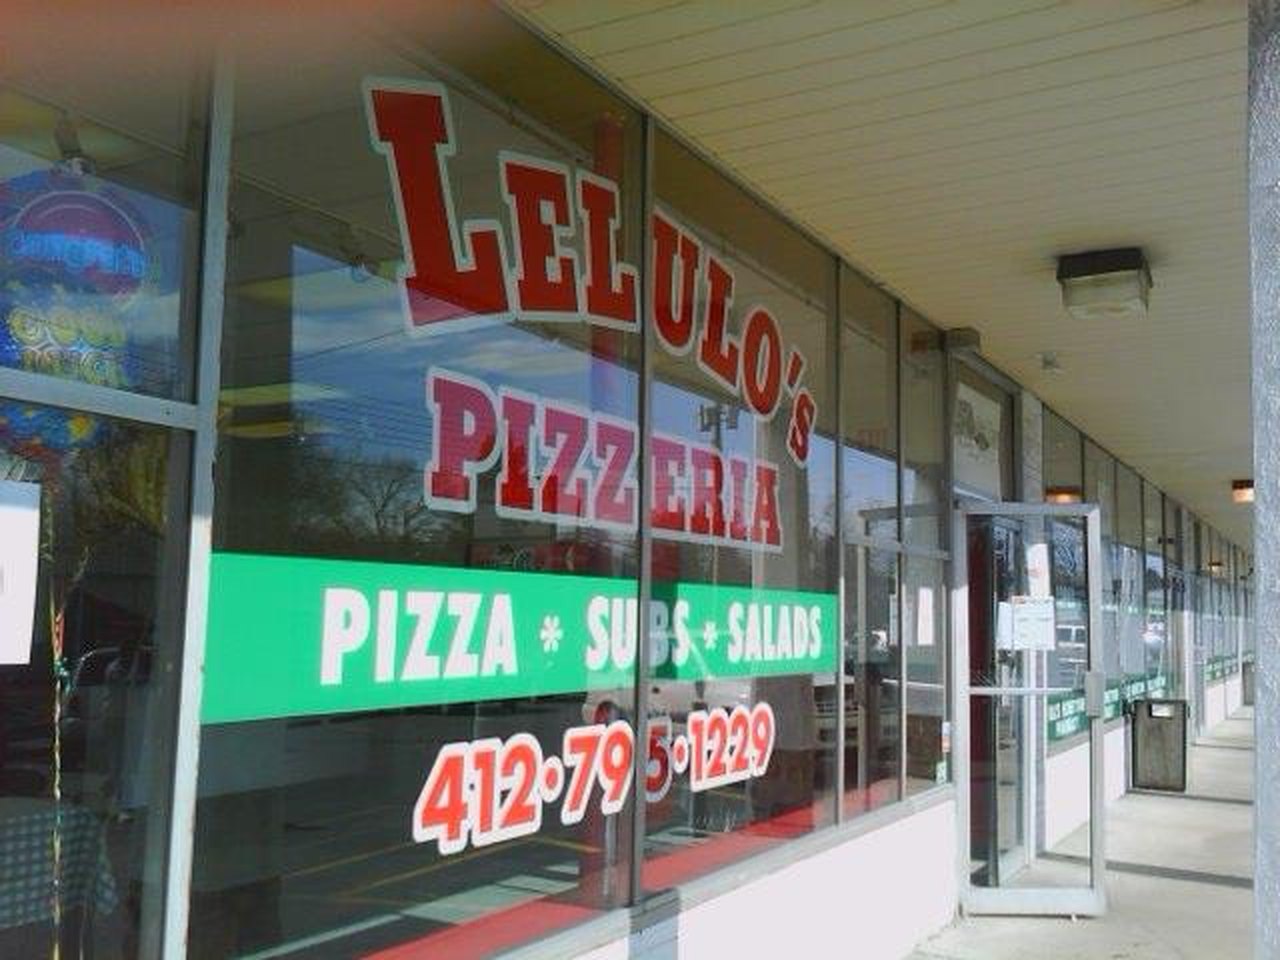 Lelulo's Pizzeria Florida - BACK BY POPULAR DEMAND! 🍕It's the Pittsburgh Pierogi  Pizza! Pittsburgh was introduced to the pierogi by immigrants who came to  'THE BURGH seeking work and a better life.